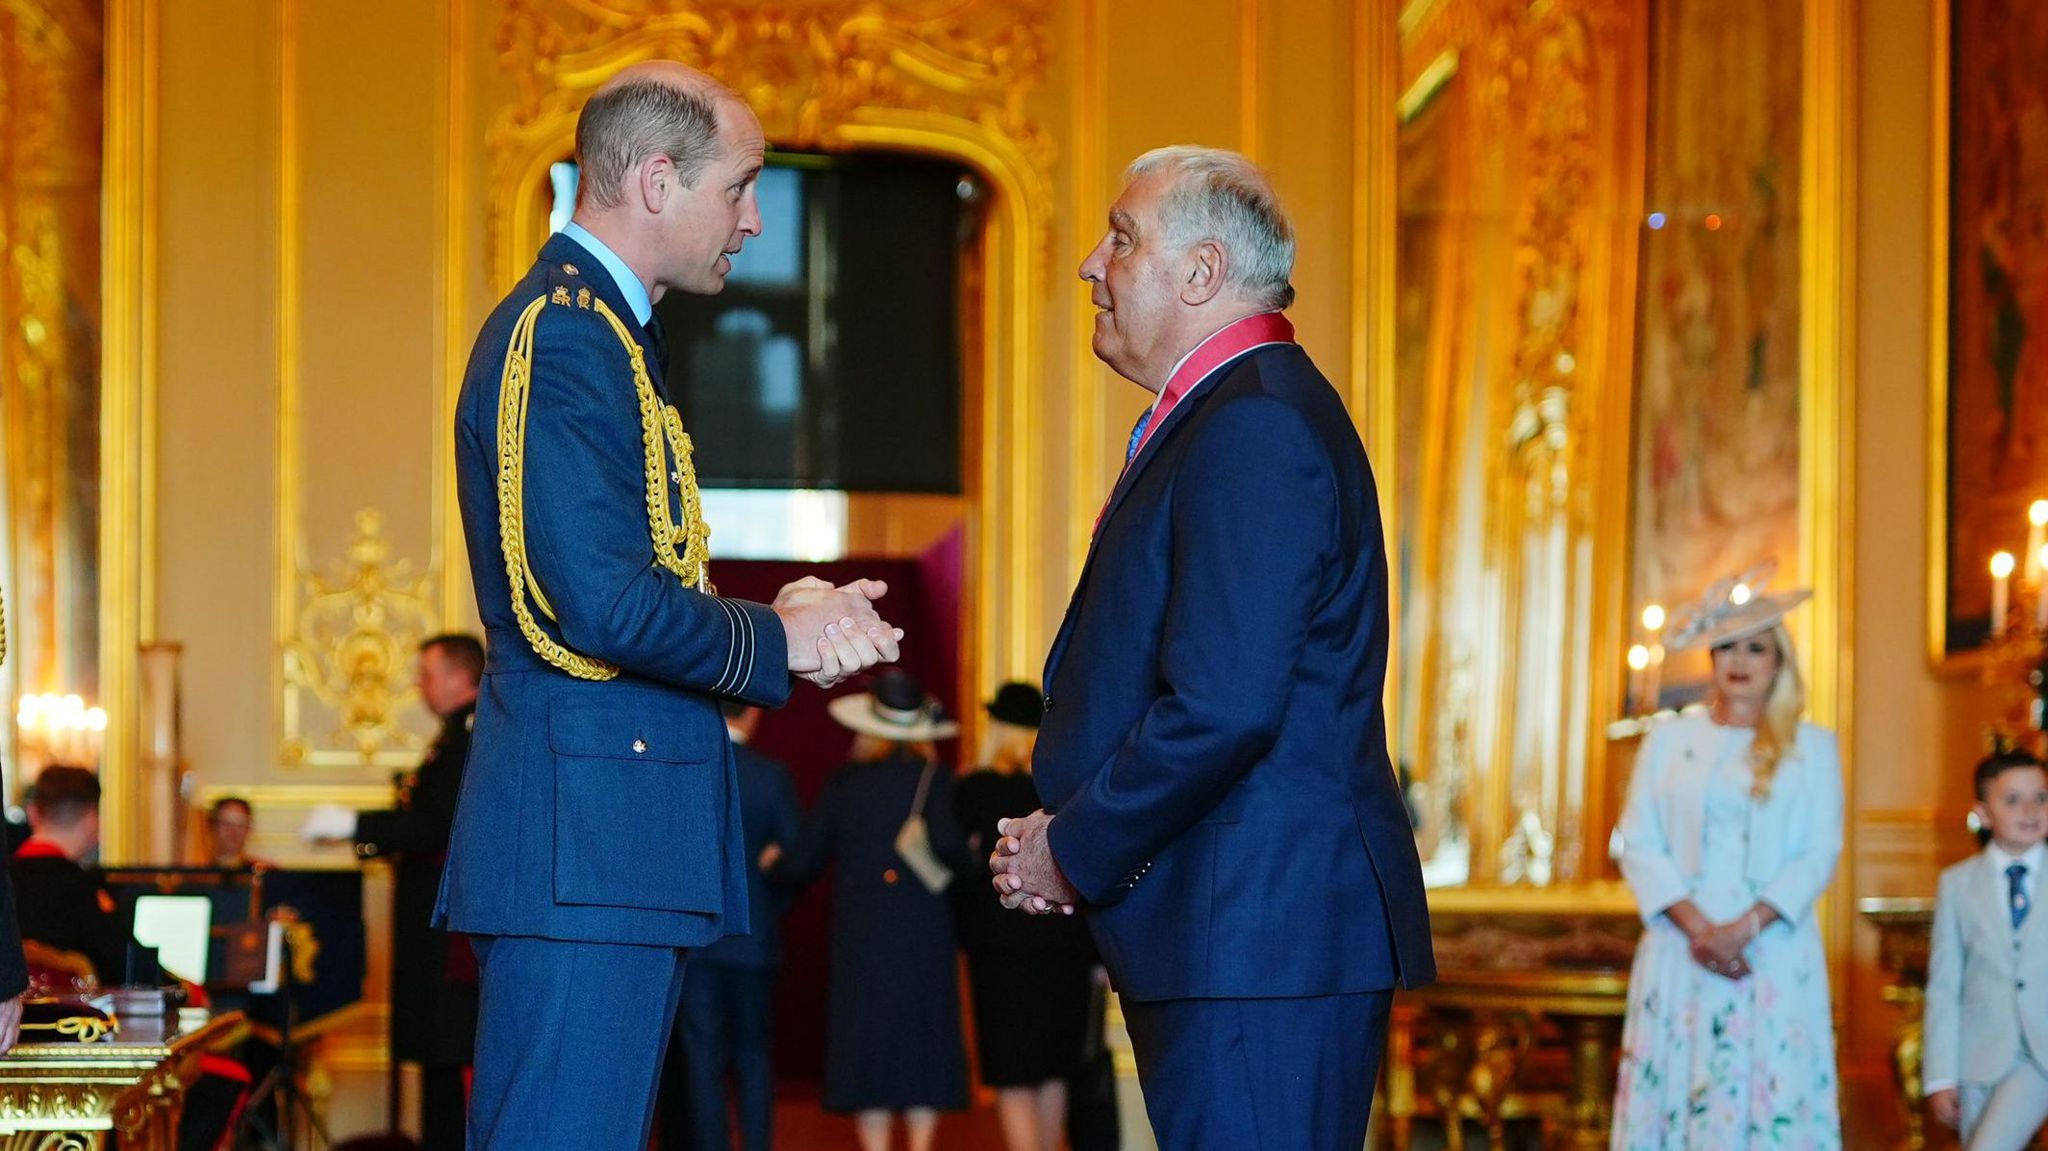 The Prince of Wales talking to Peter Shilton after appointing him CBE at a gold-coloured Windsor Castle reception room